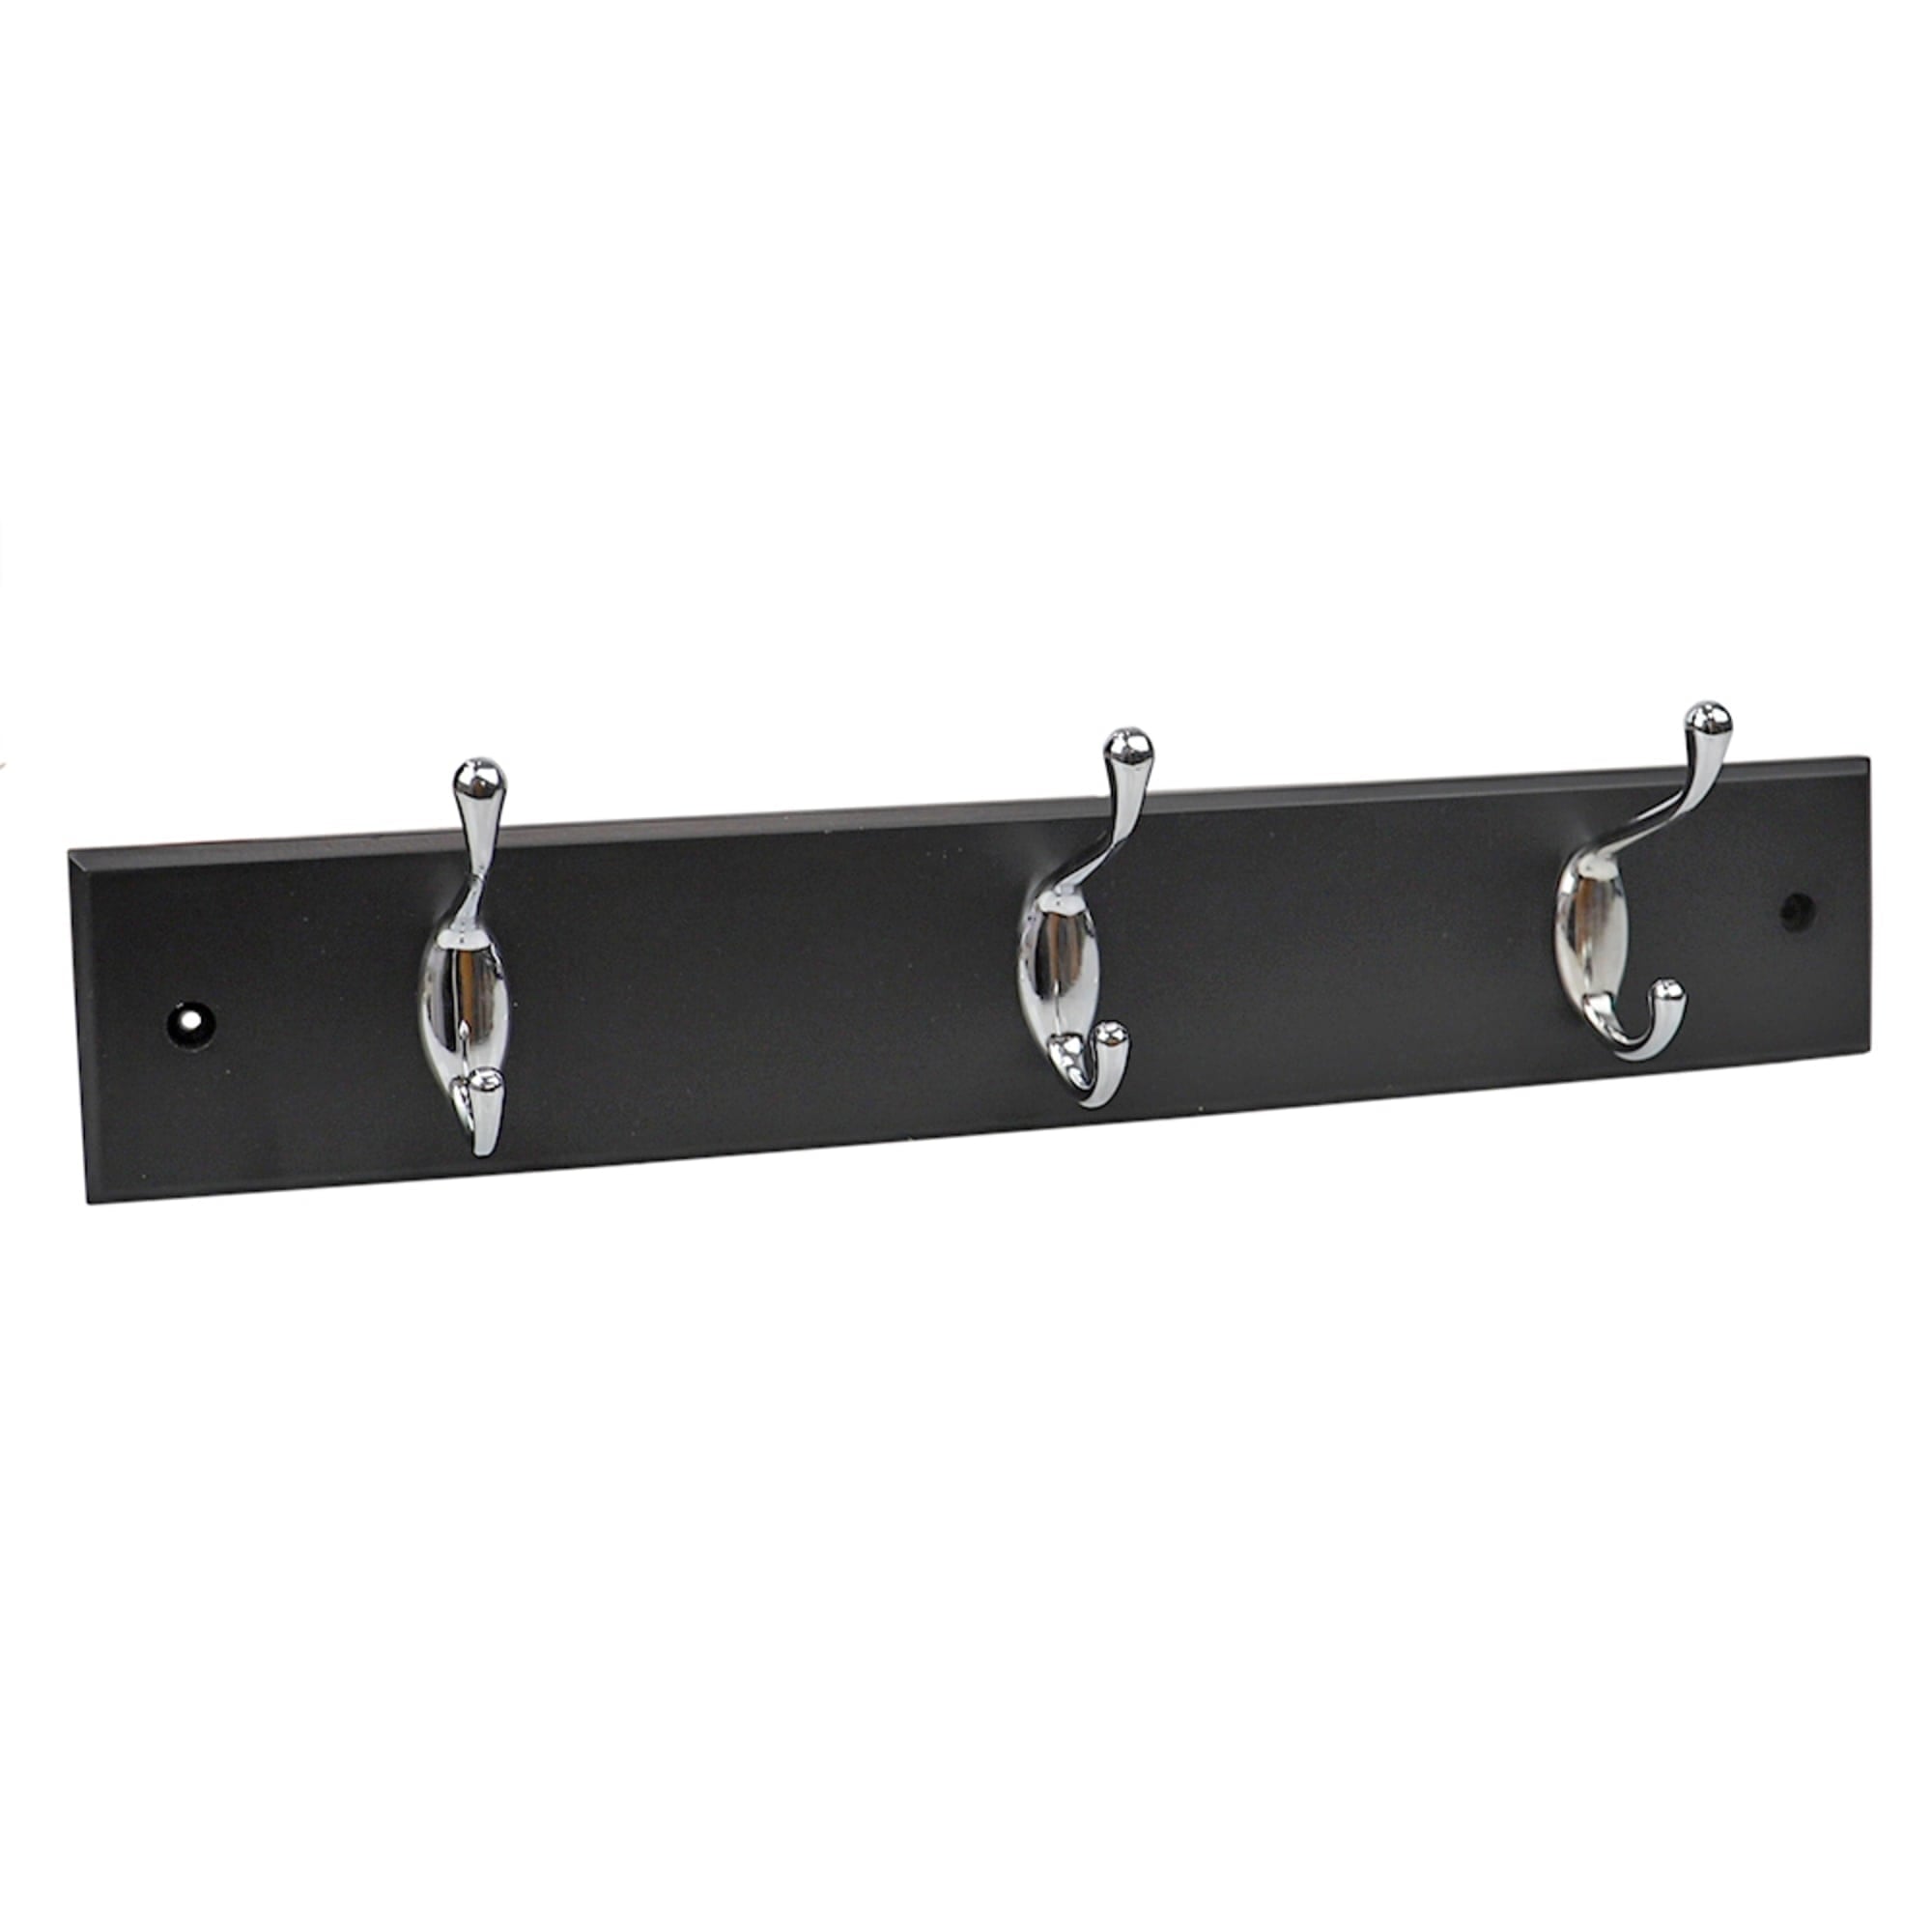 Home Basics 3 Double Hook Wall Mounted Hanging Rack, Black $8.00 EACH, CASE PACK OF 12